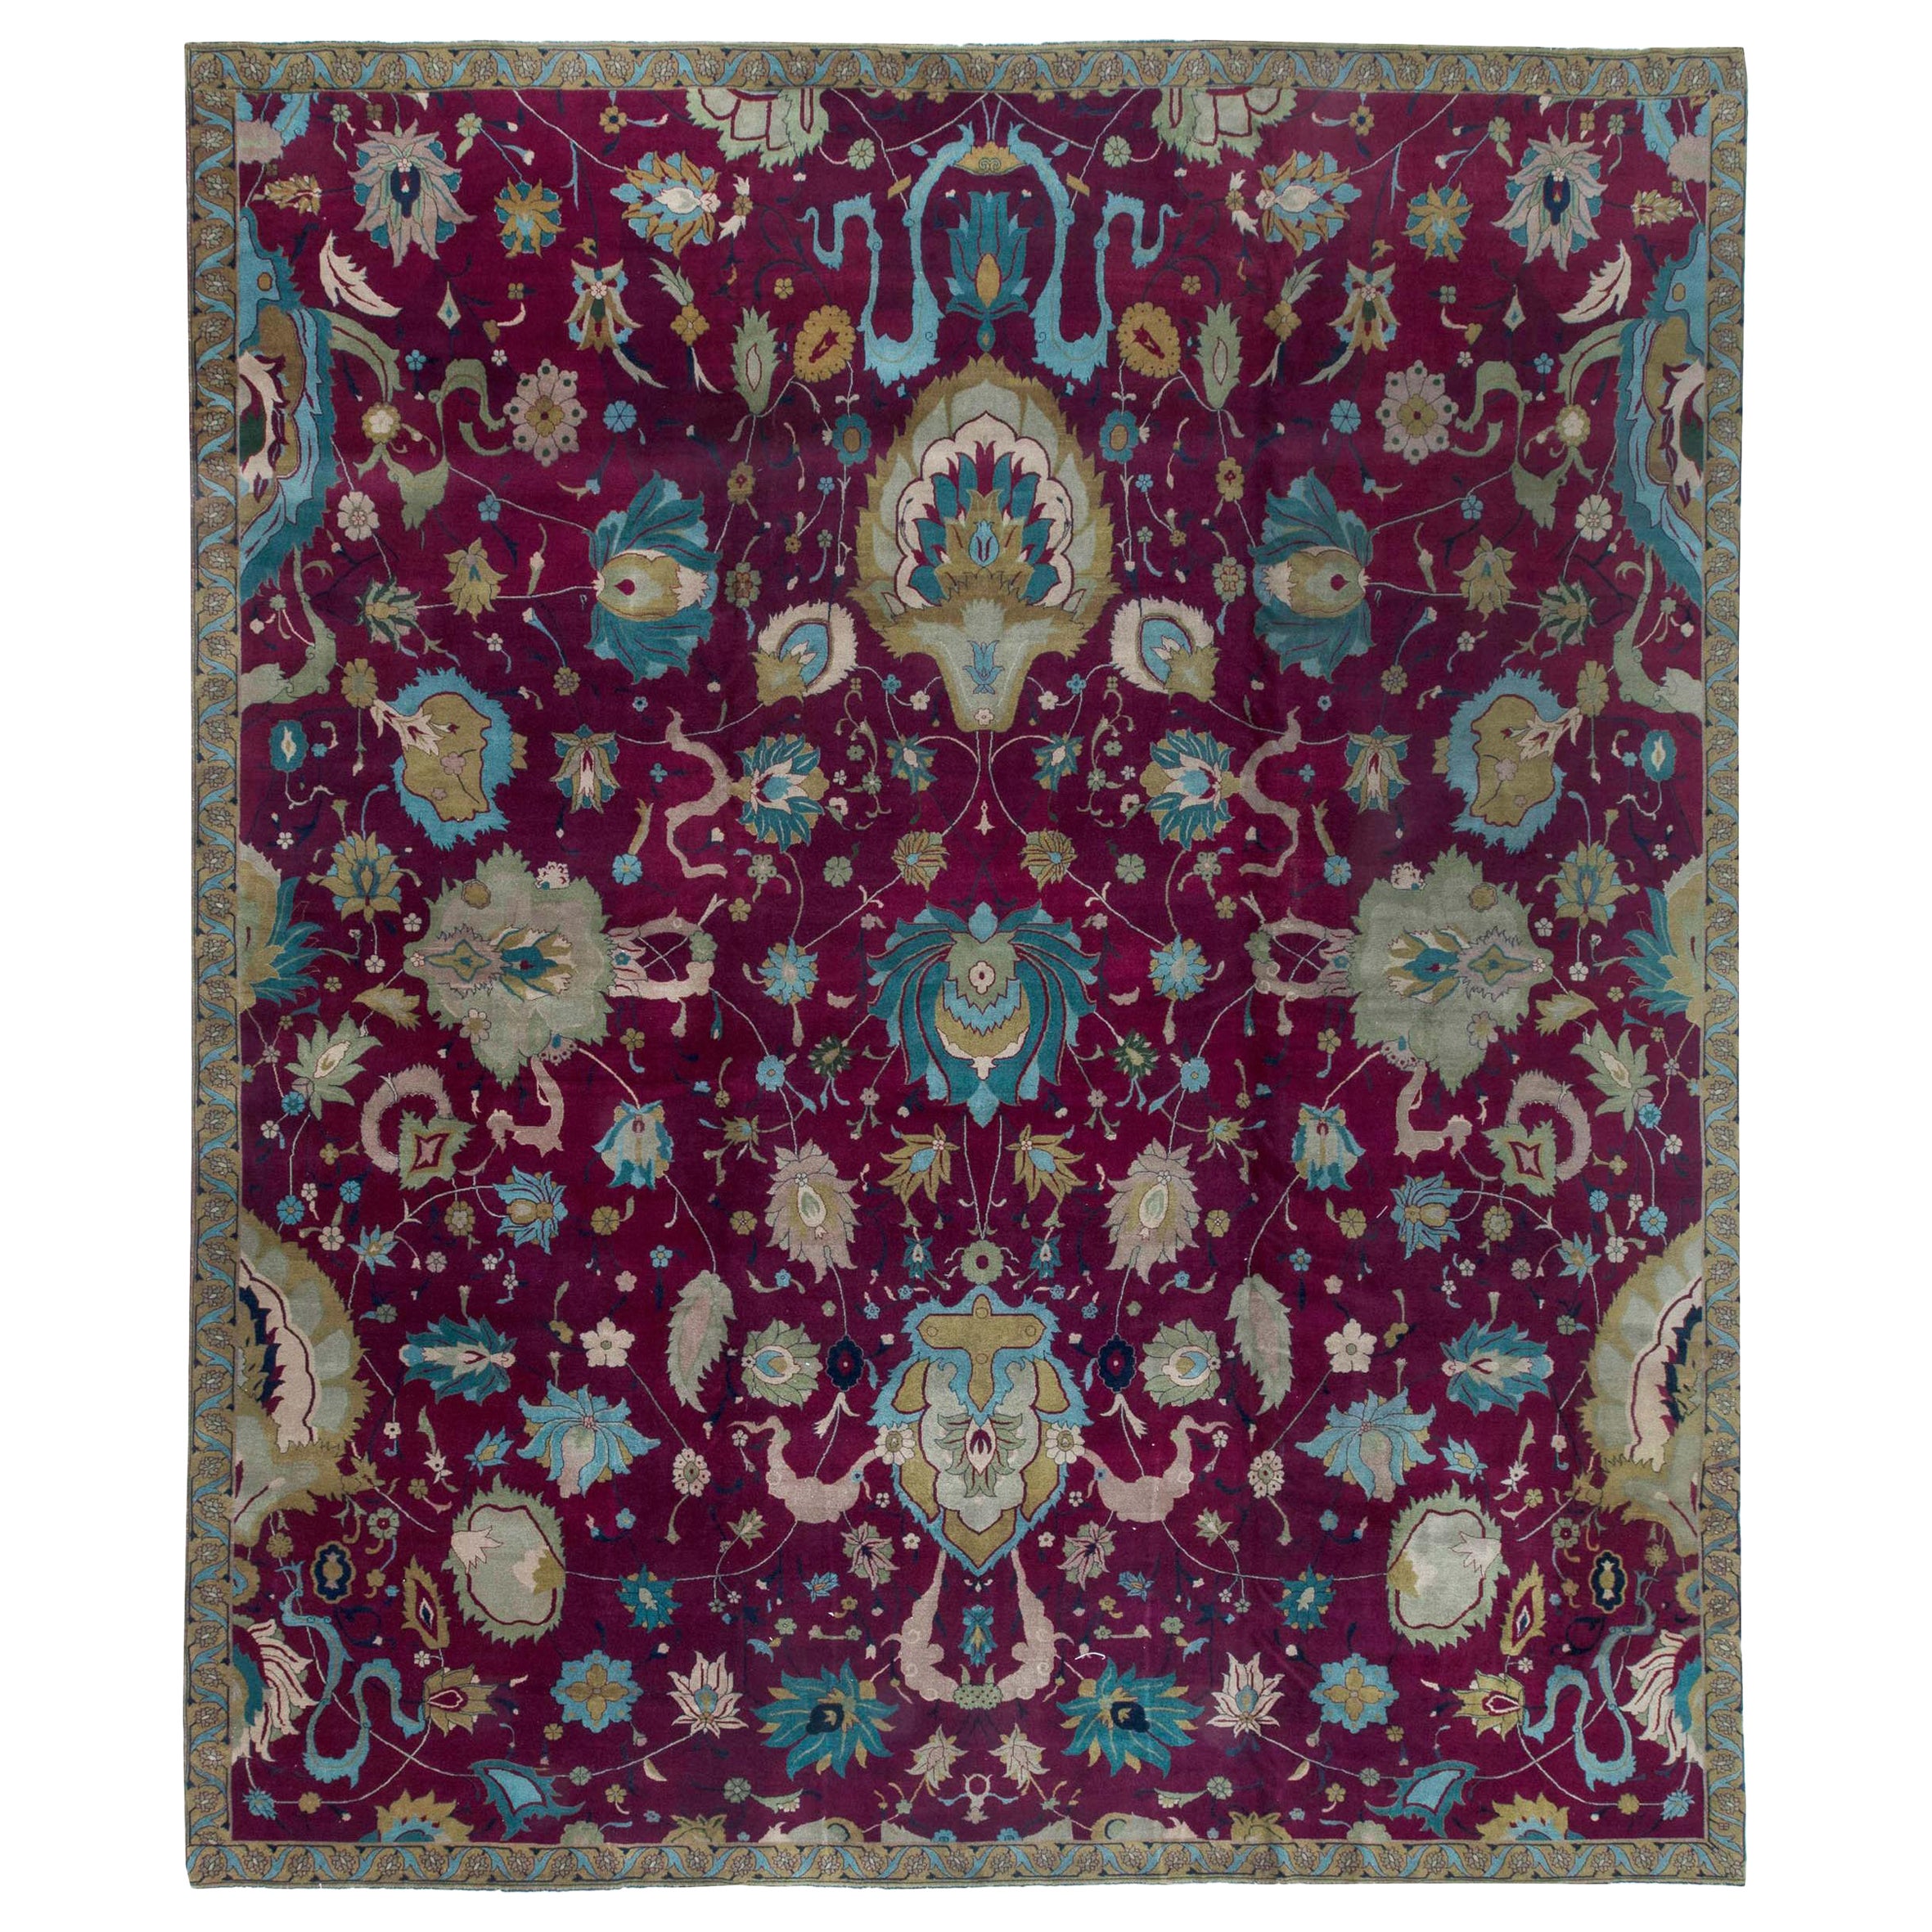 Early 20th Century Purple Floral Indian Handmade Wool Rug For Sale